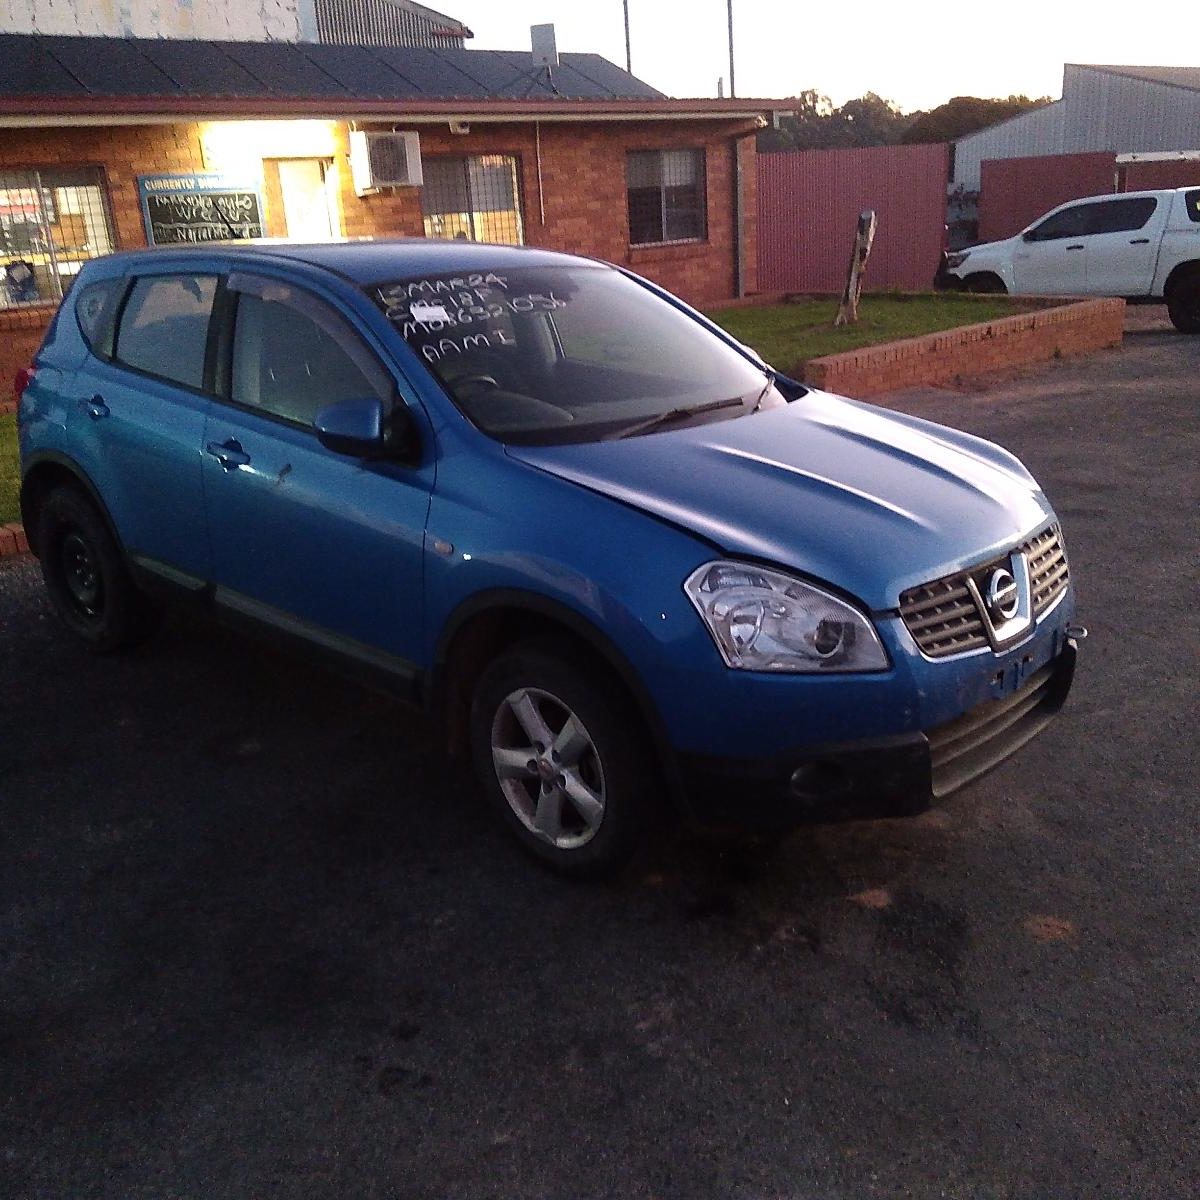 2010 NISSAN DUALIS RIGHT GUARD